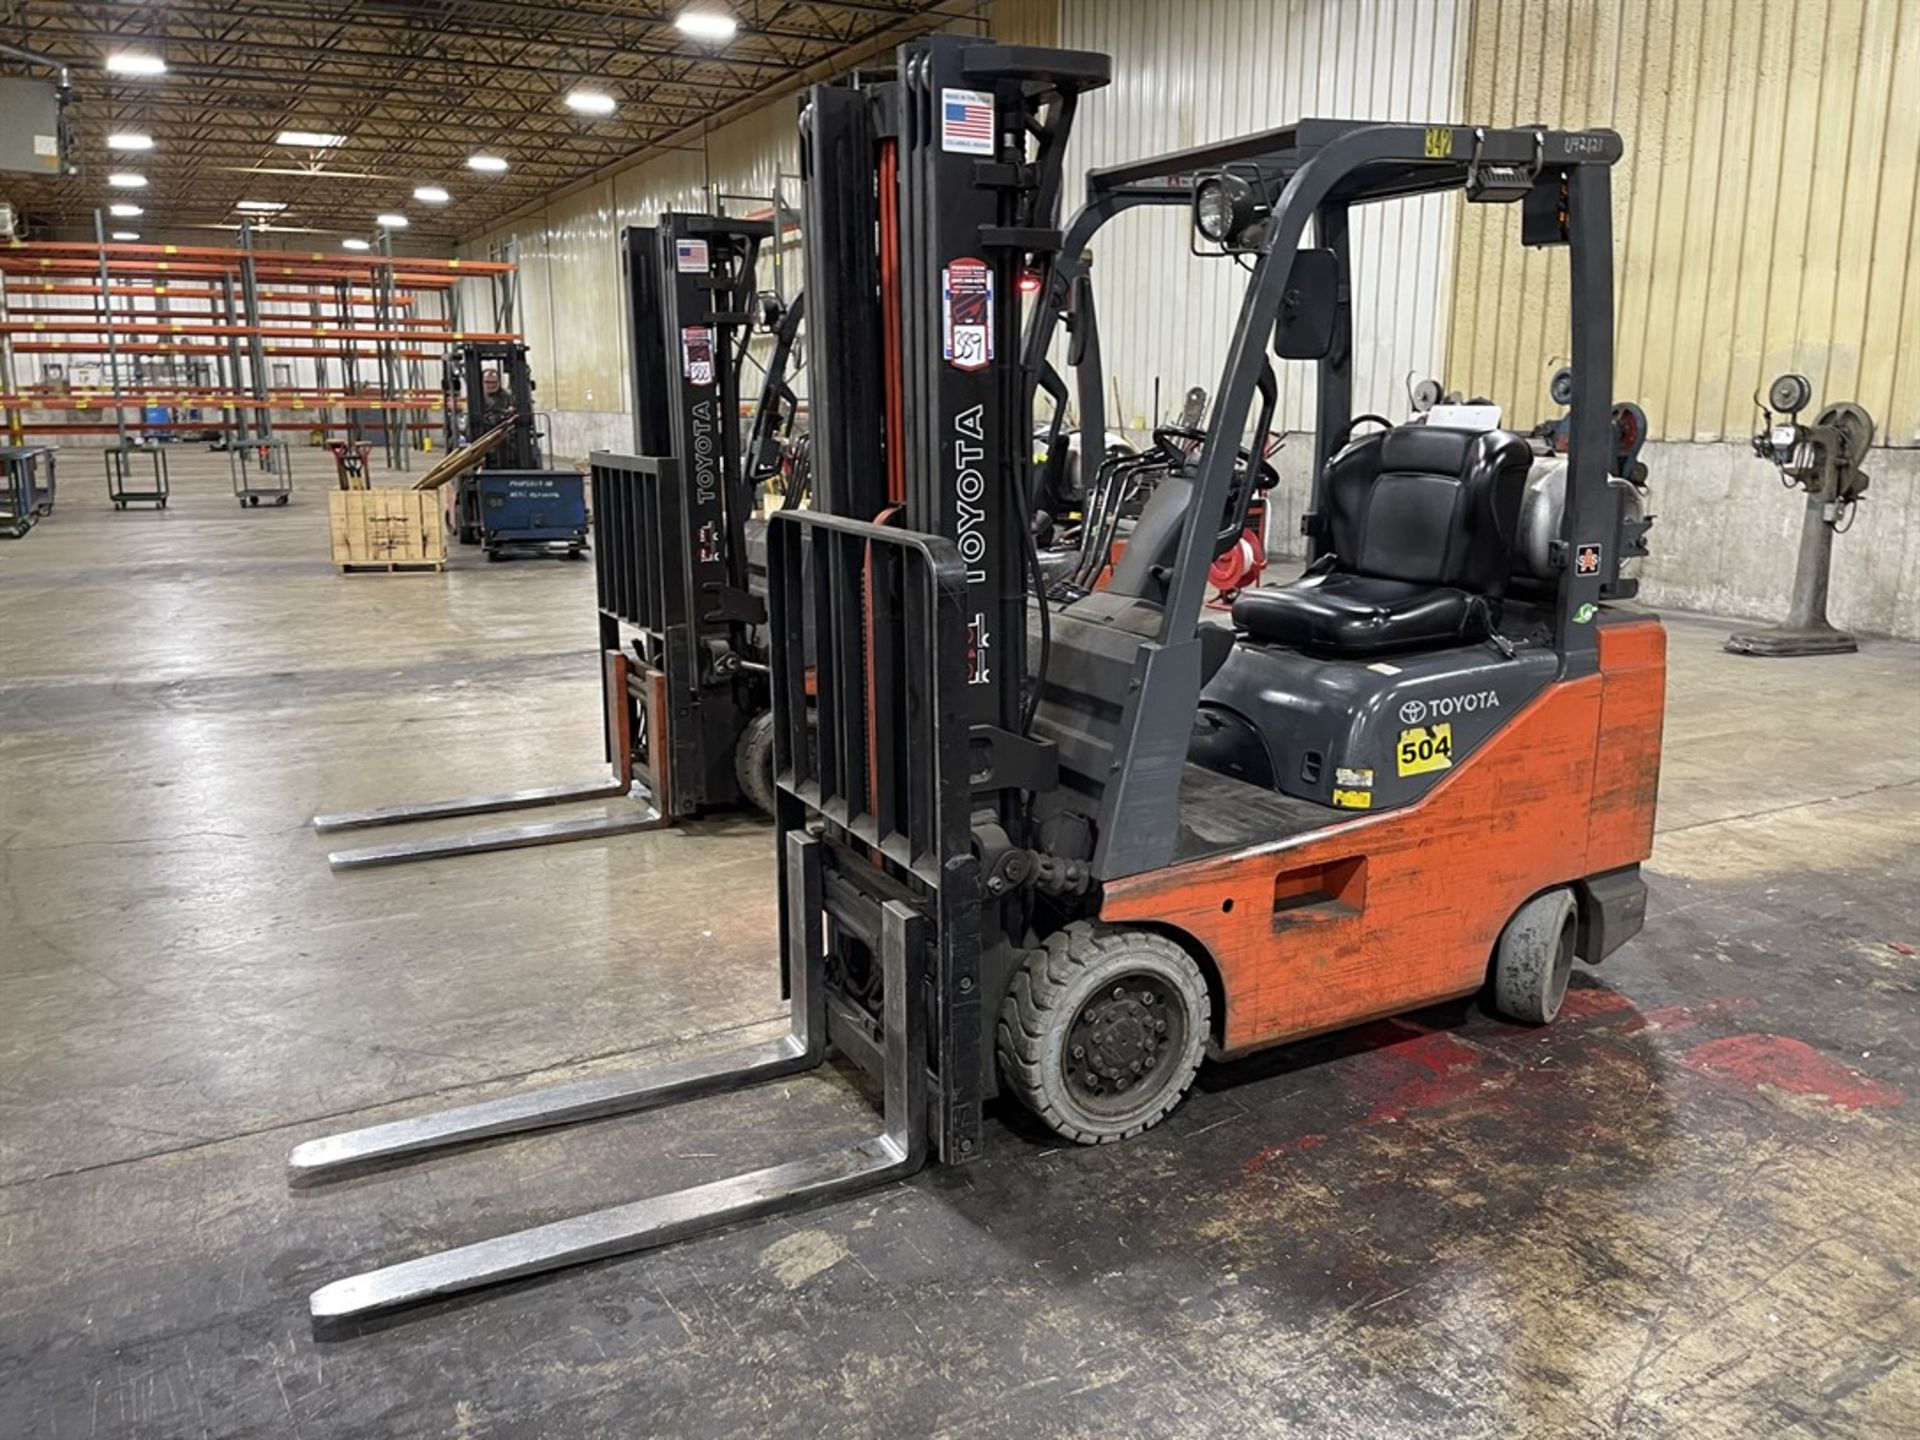 TOYOTA 8FGCSU20 LP Forklift, s/n 13417, 4,000 Lb. Capacity, Side Shift, 3-Stage Mast, Cushion Tire